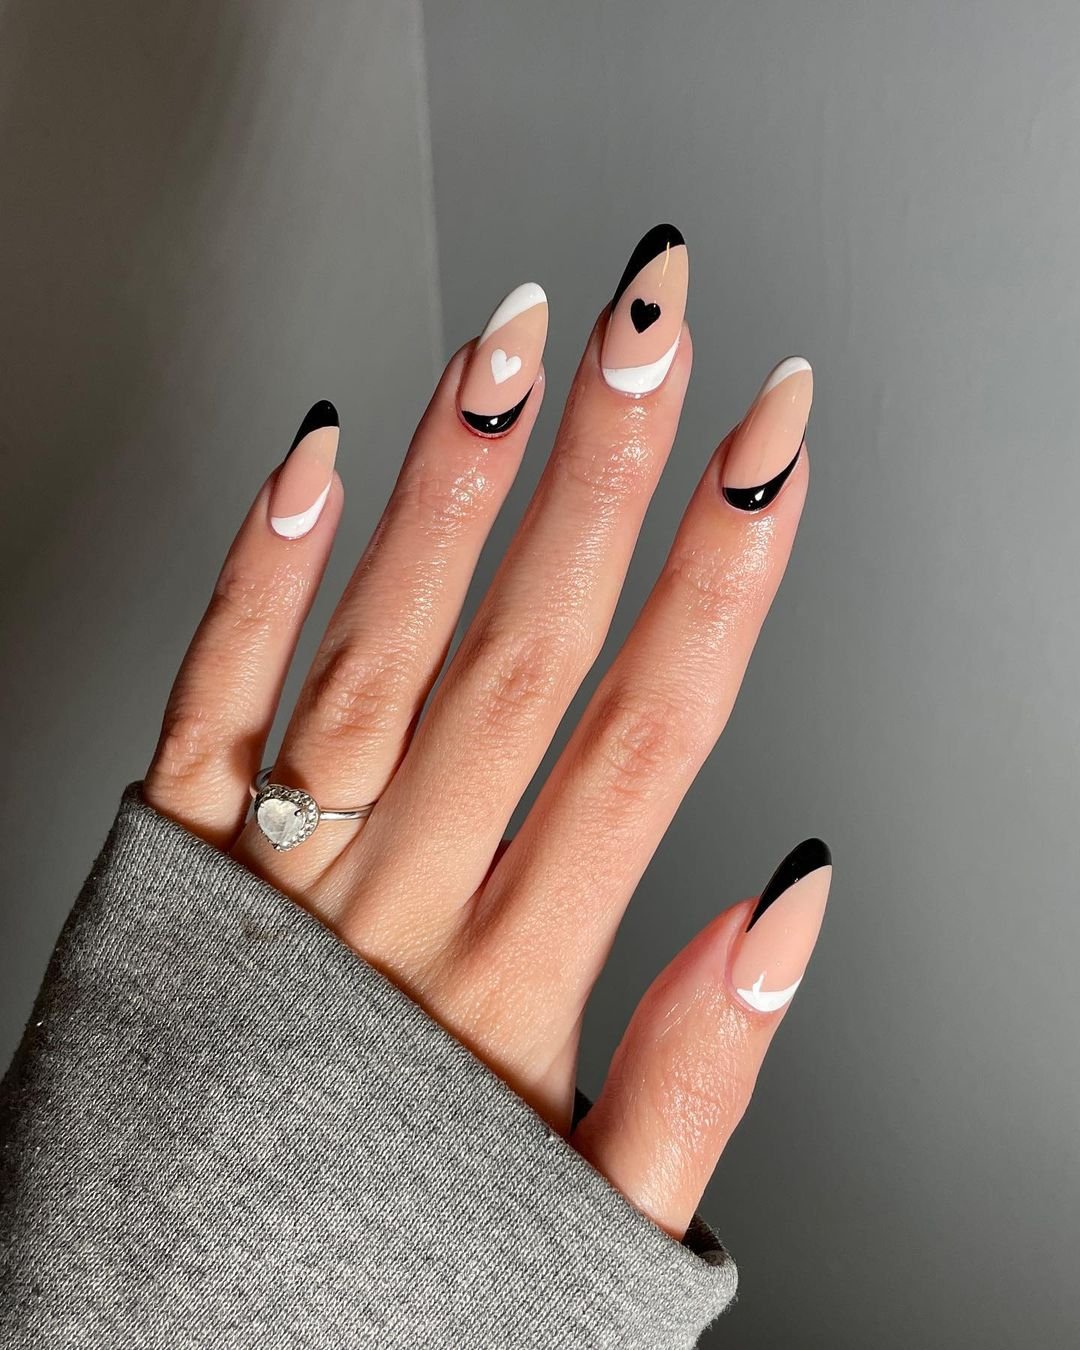 25 - Picture of Black and White Nails